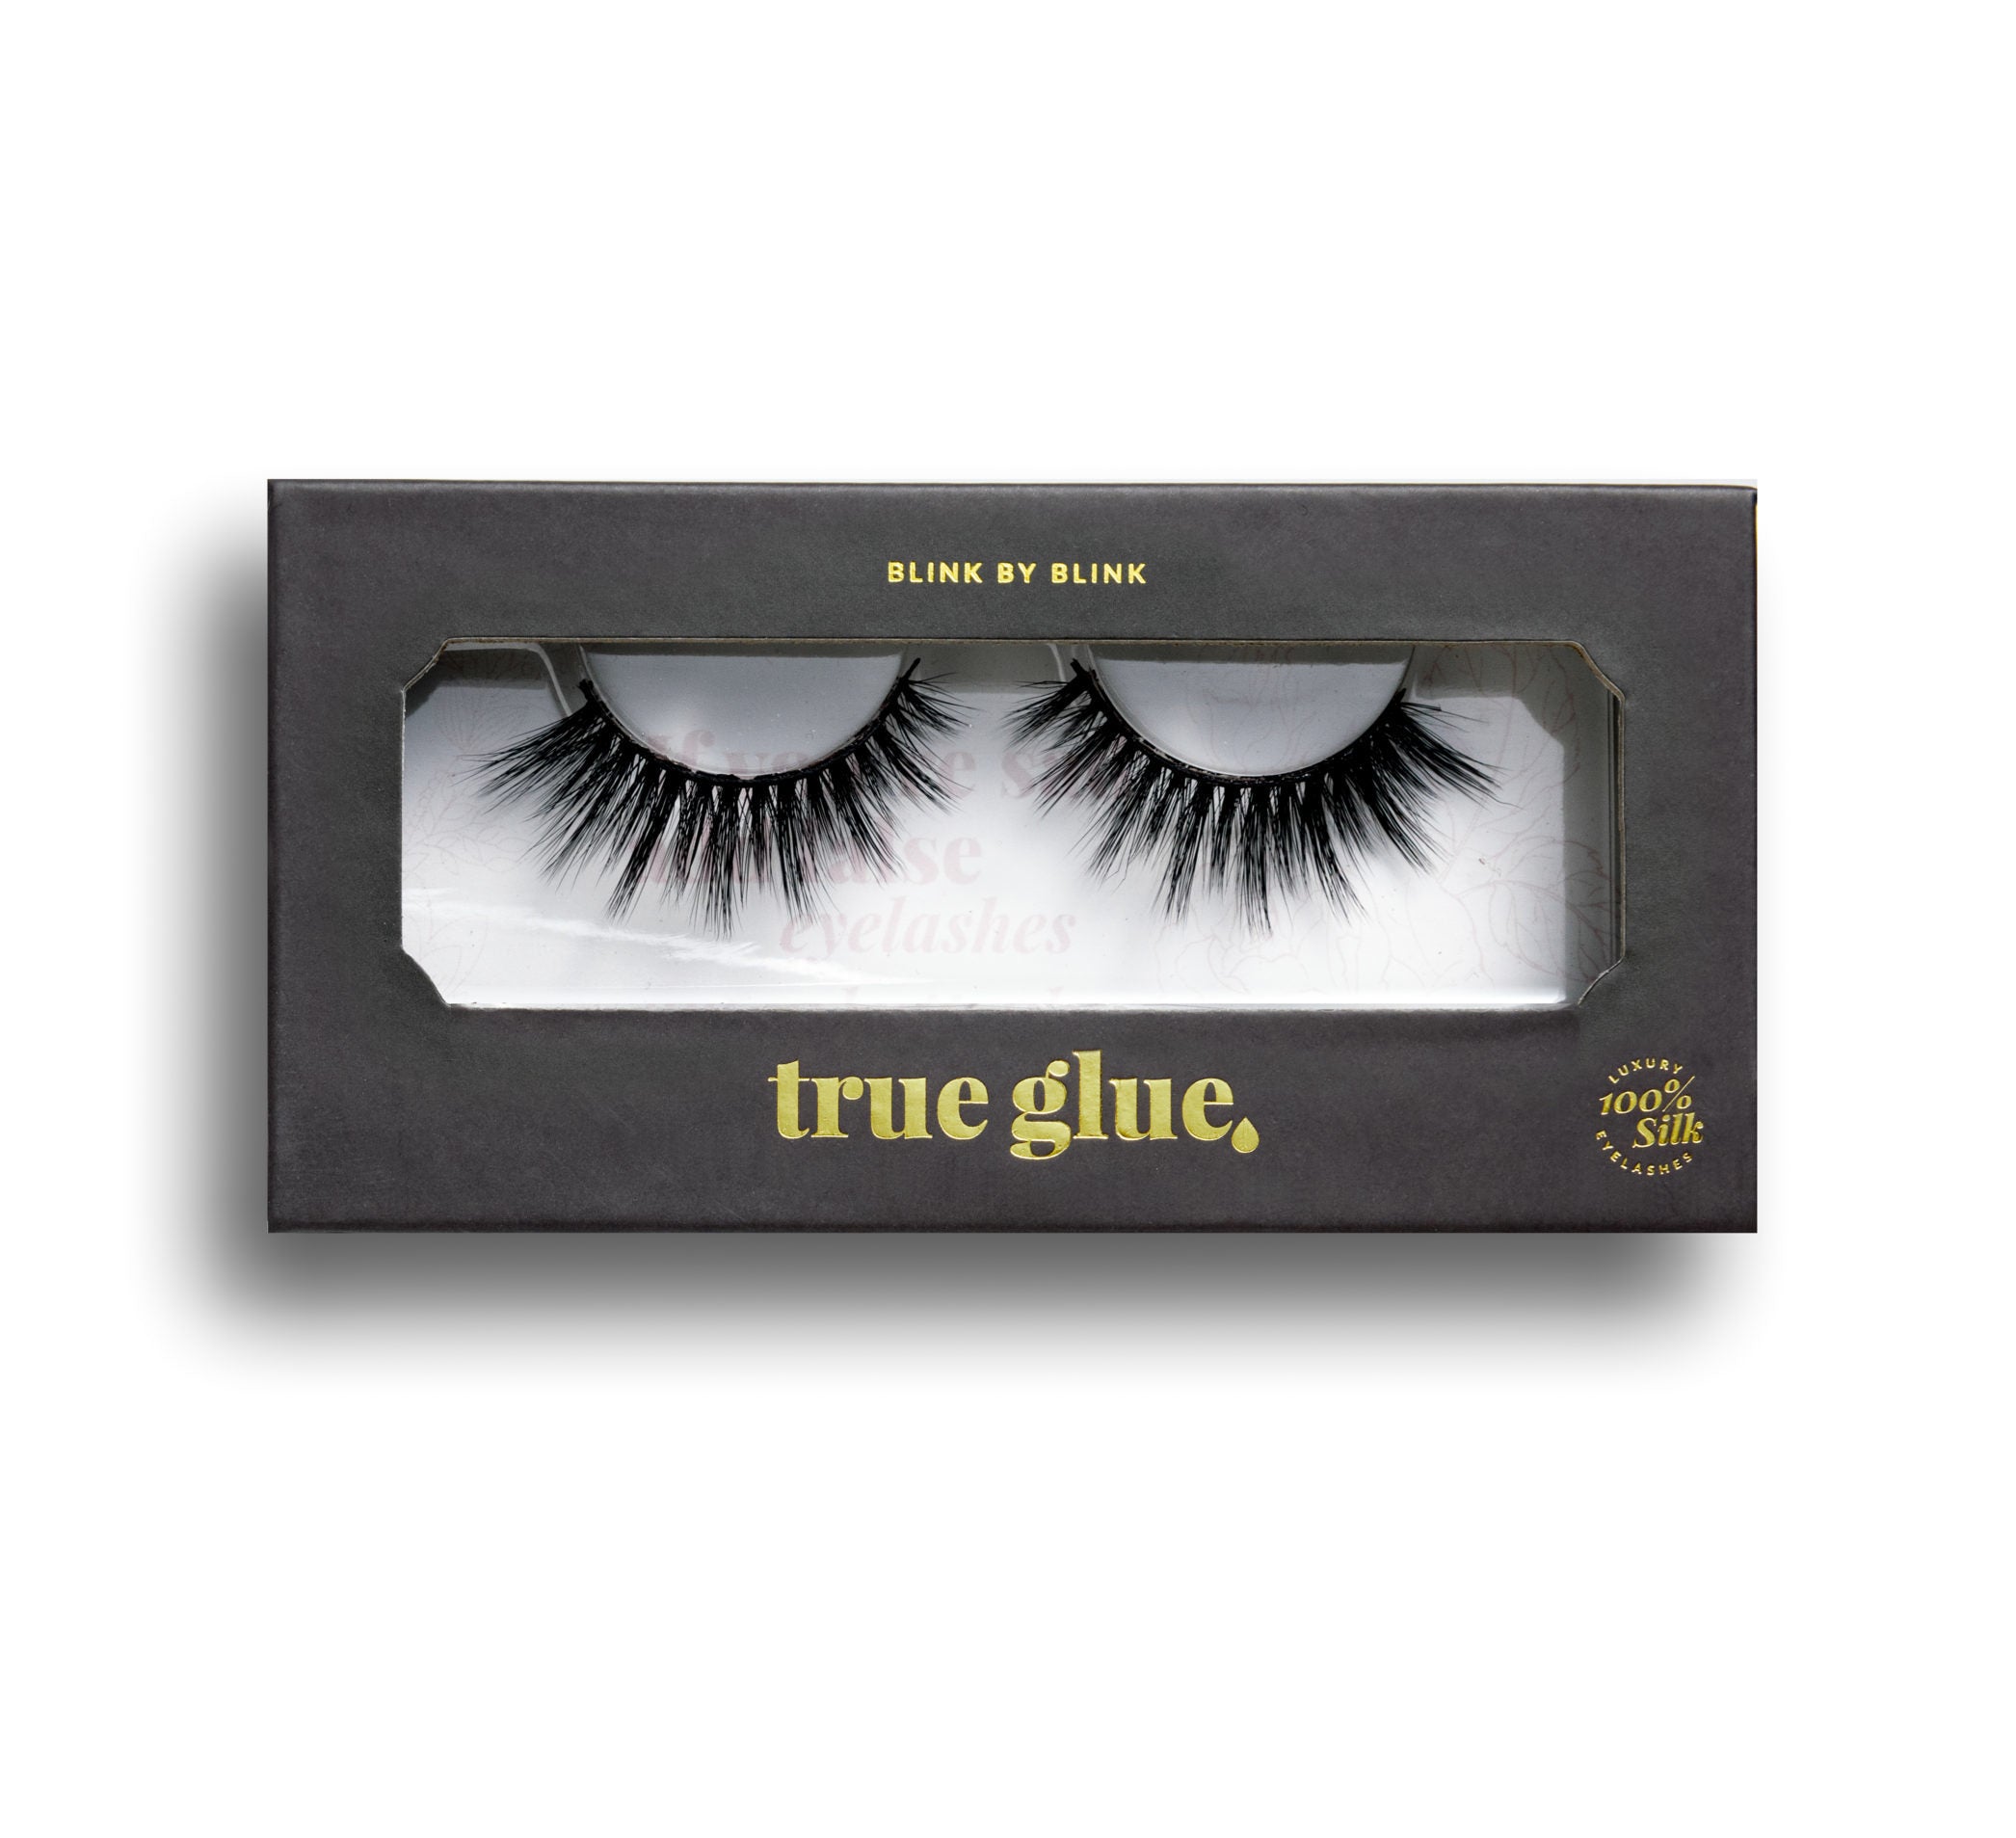 Lashes in the style Blink By Blink